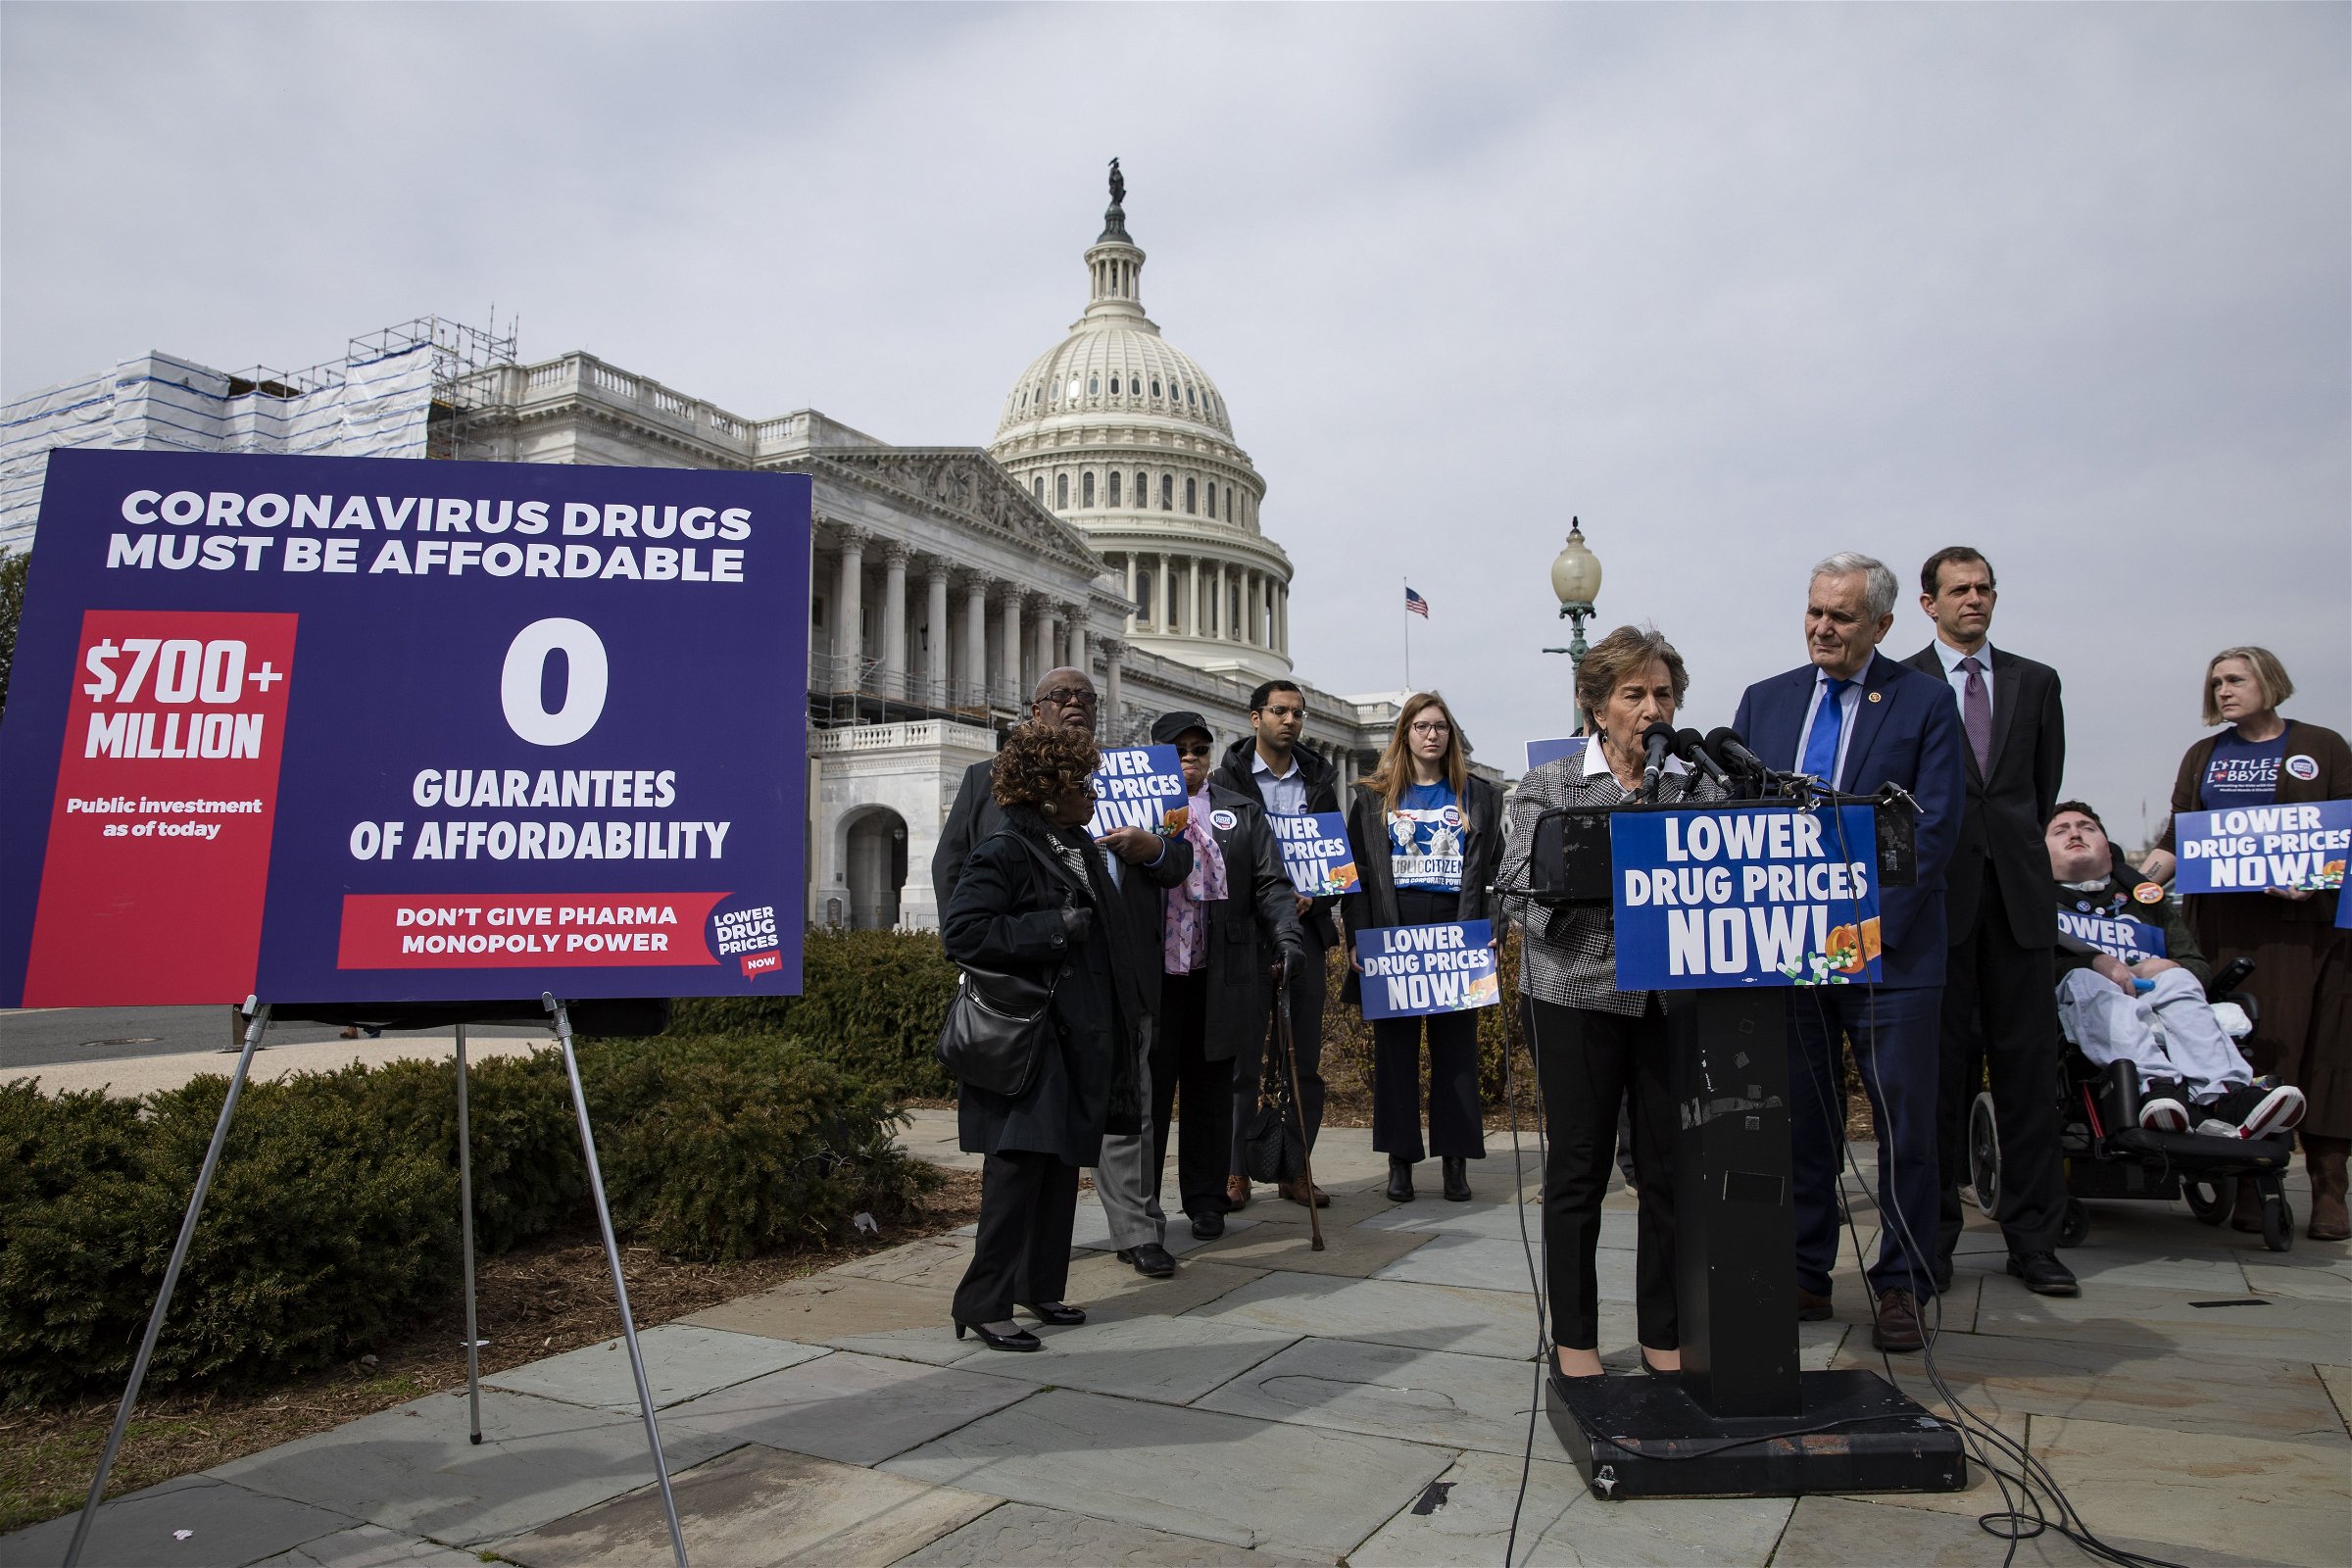 Rep. Jan Schakowsky speaks during a press conference with Rep. Lloyd Doggett calling for lower drug prices, especially in regards to the coronavirus on March 5, 2020 in Washington, DC. (Photo: Samuel Corum/Getty Images)